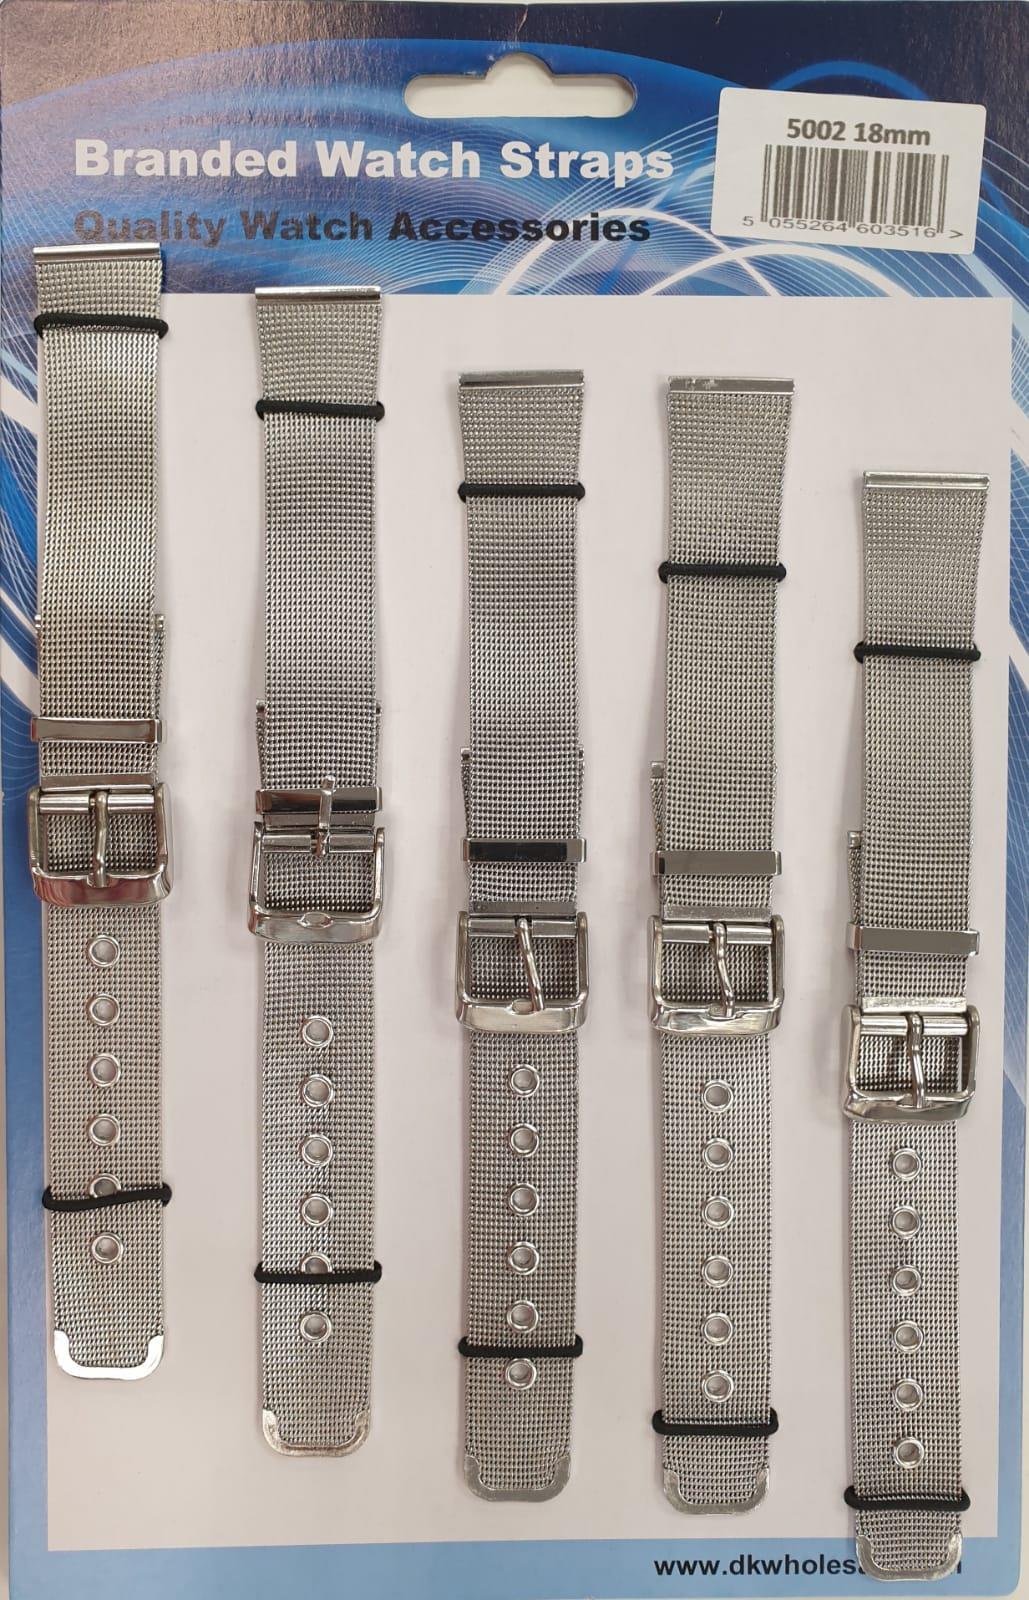 5002 Metal Mesh Watch Straps 5PK Available Sizes 12MM - 18mm